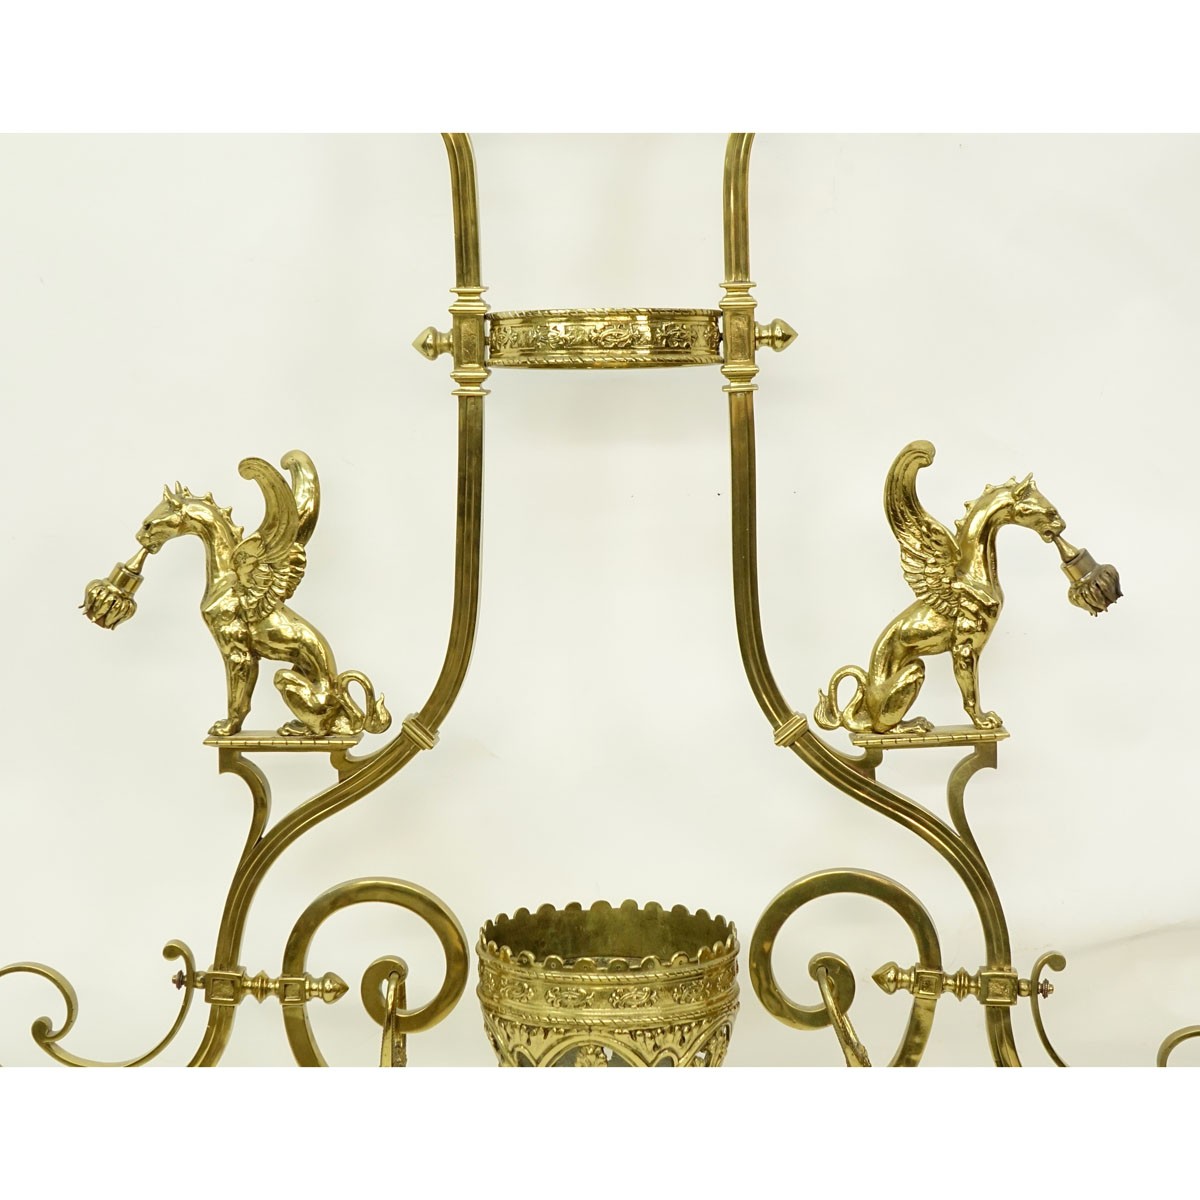 Large Gothic Style Gilt Bronze Two Arm Billiard Light Fixture with Amber Color Glass Shades. Good c